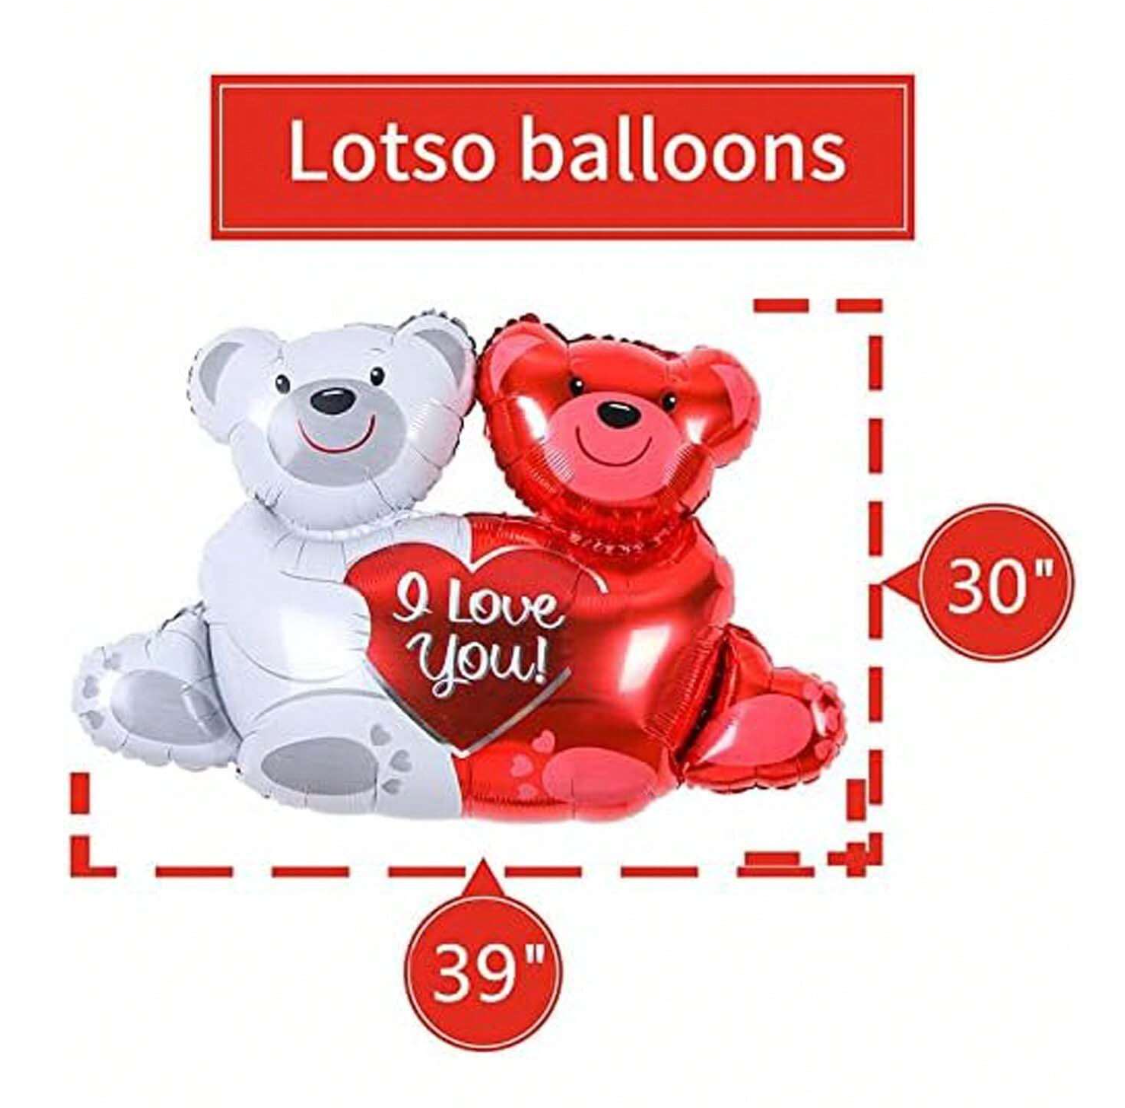 Love in the Air: 55 Valentine's Day Balloons & 1000 Silk Rose Petals Pack - "I Love You" Balloons, Heart-Shaped Delights, and Love Bears for Ultimate Romantic Decor at Anniversaries, Valentine's Day, and Special Parties!